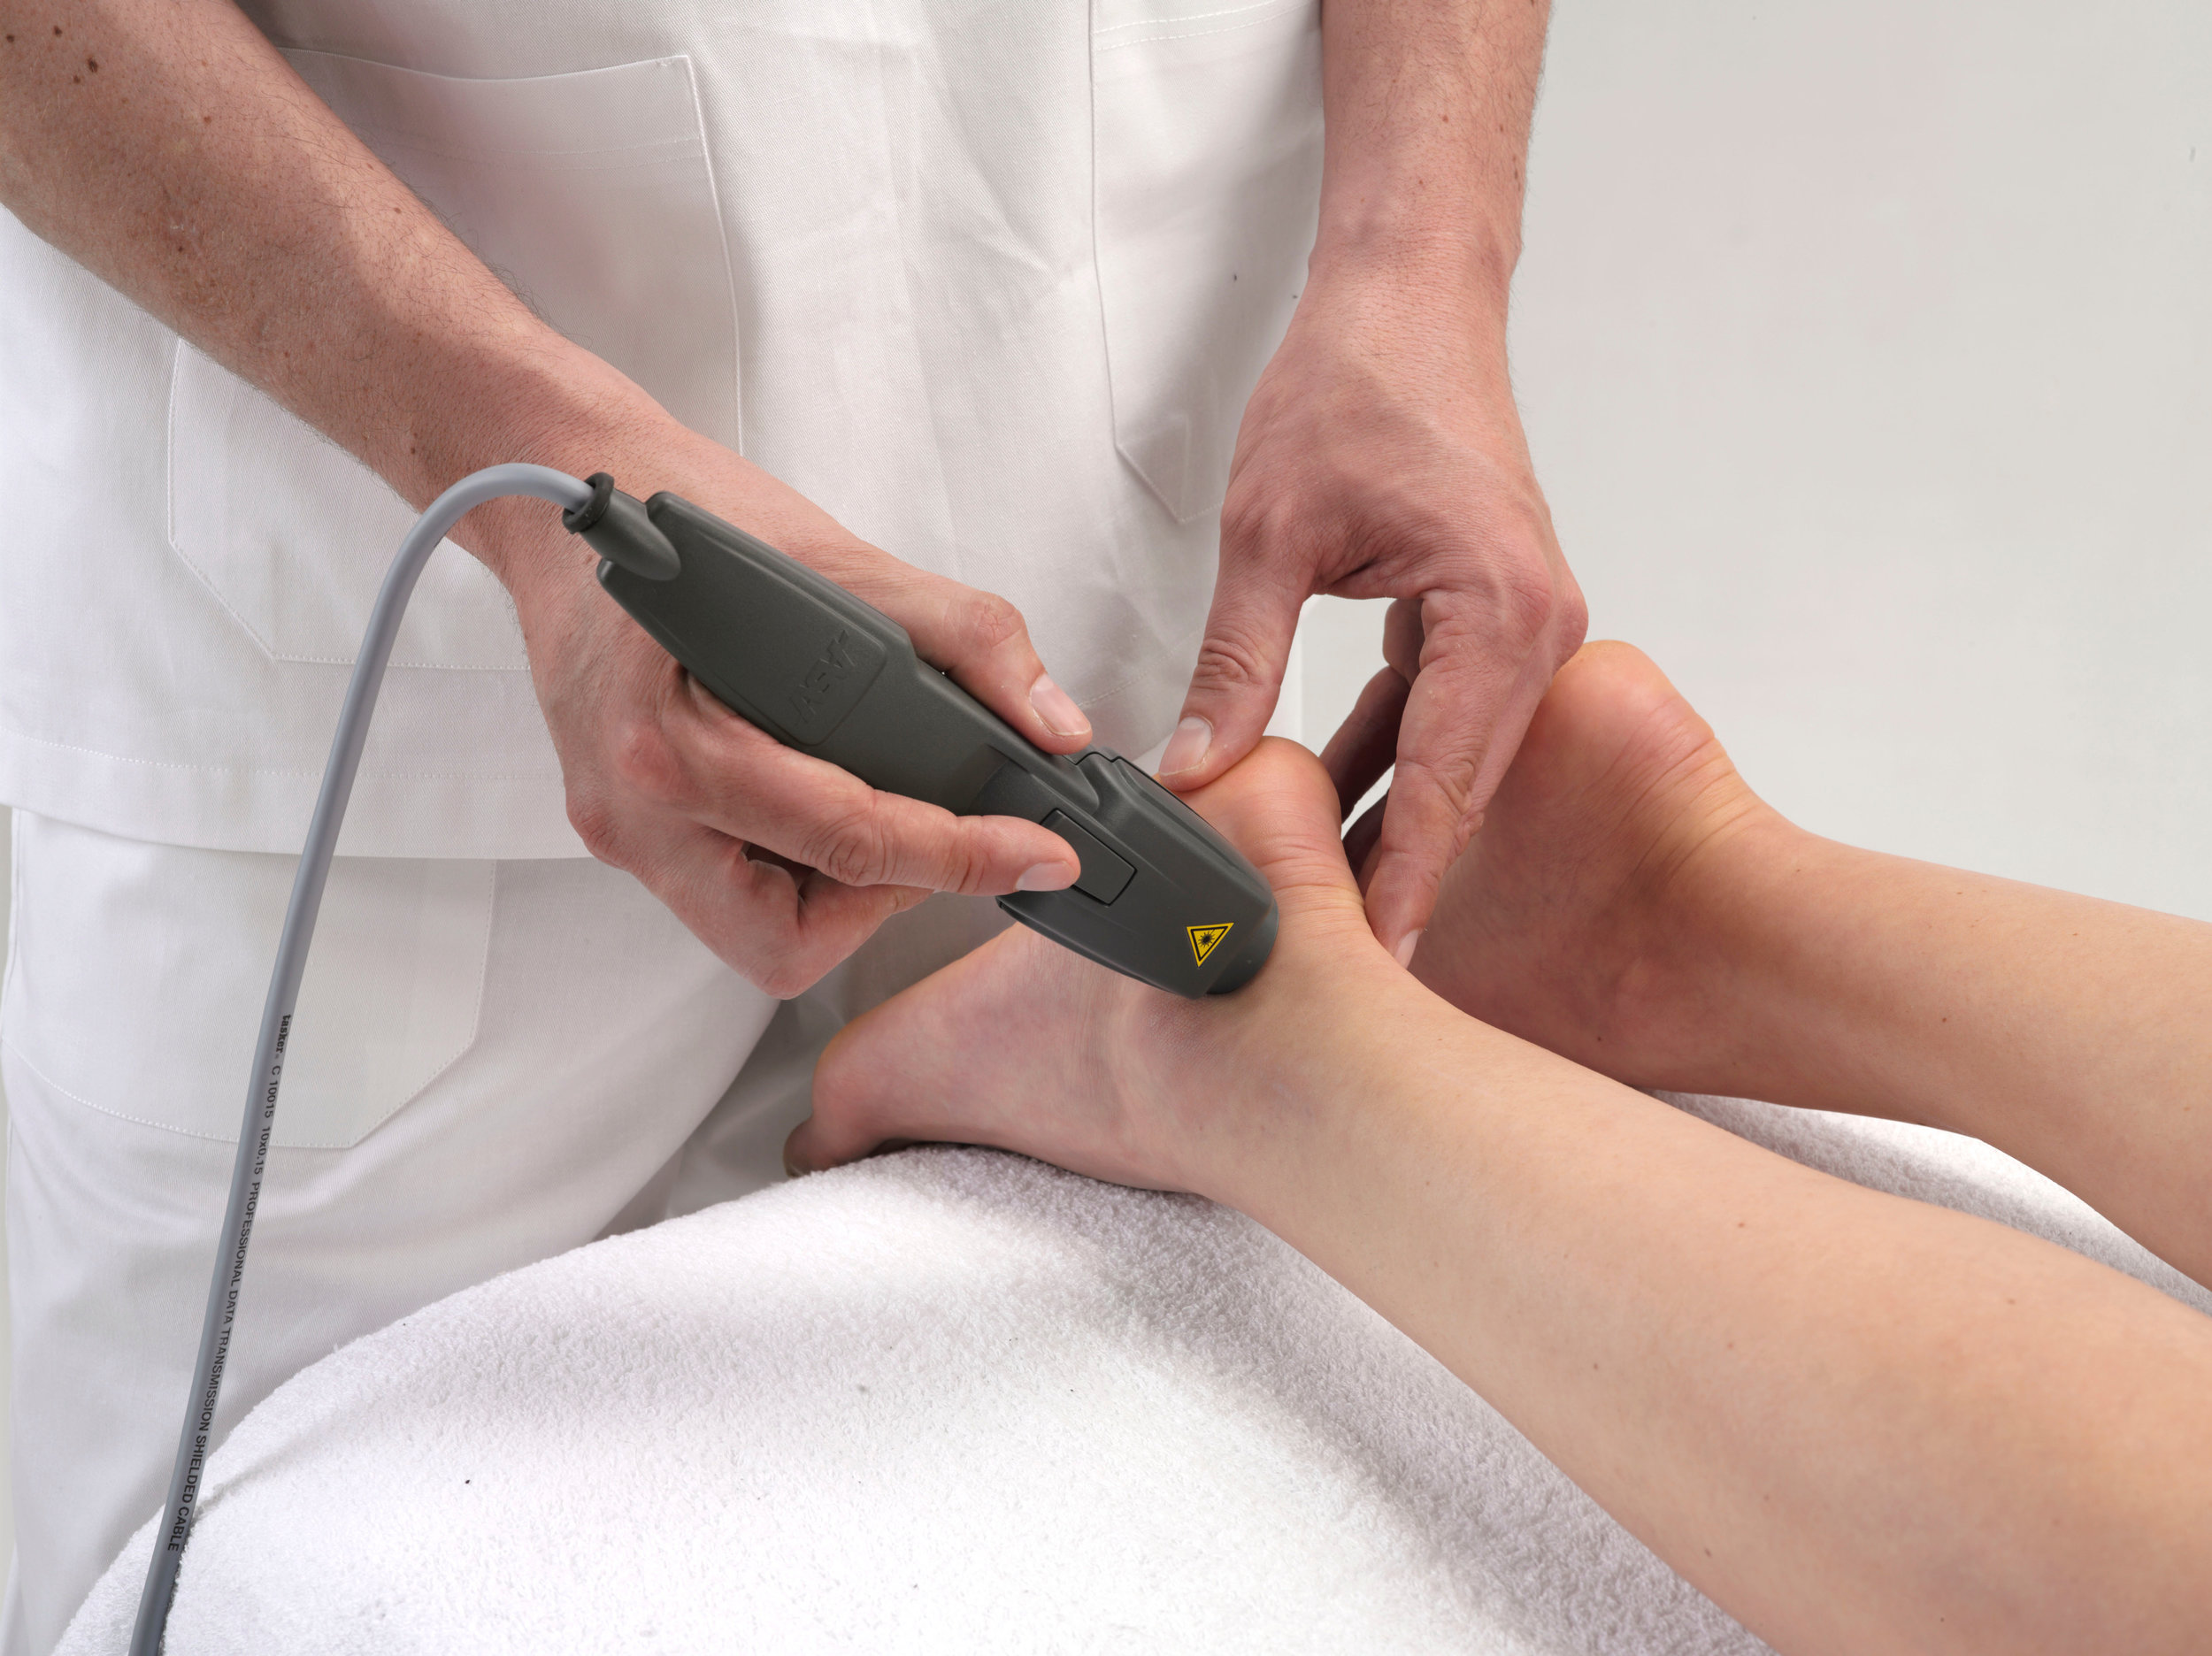 MLS Laser Therapy for Pain 